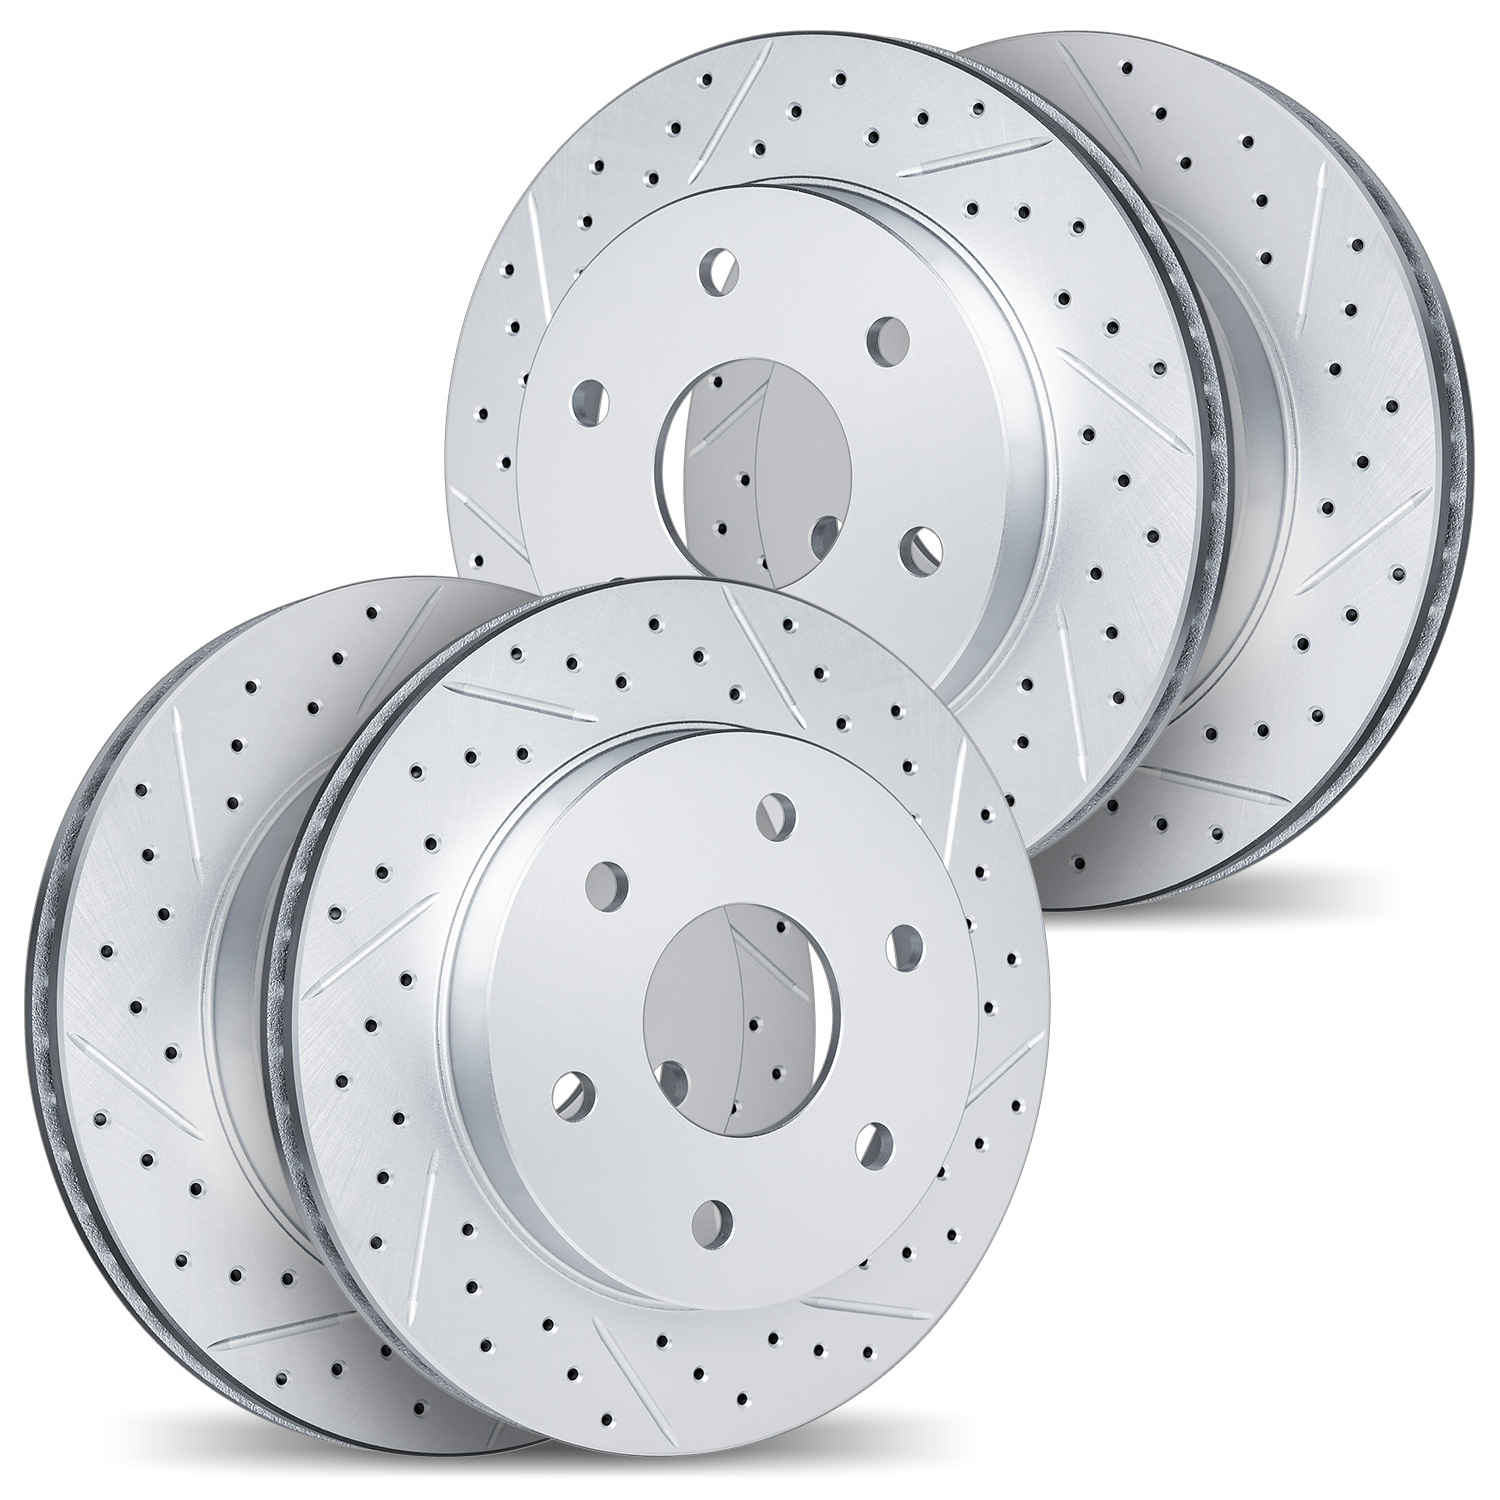 2004-37004 Geoperformance Drilled/Slotted Brake Rotors, 2001-2004 Multiple Makes/Models, Position: Front and Rear